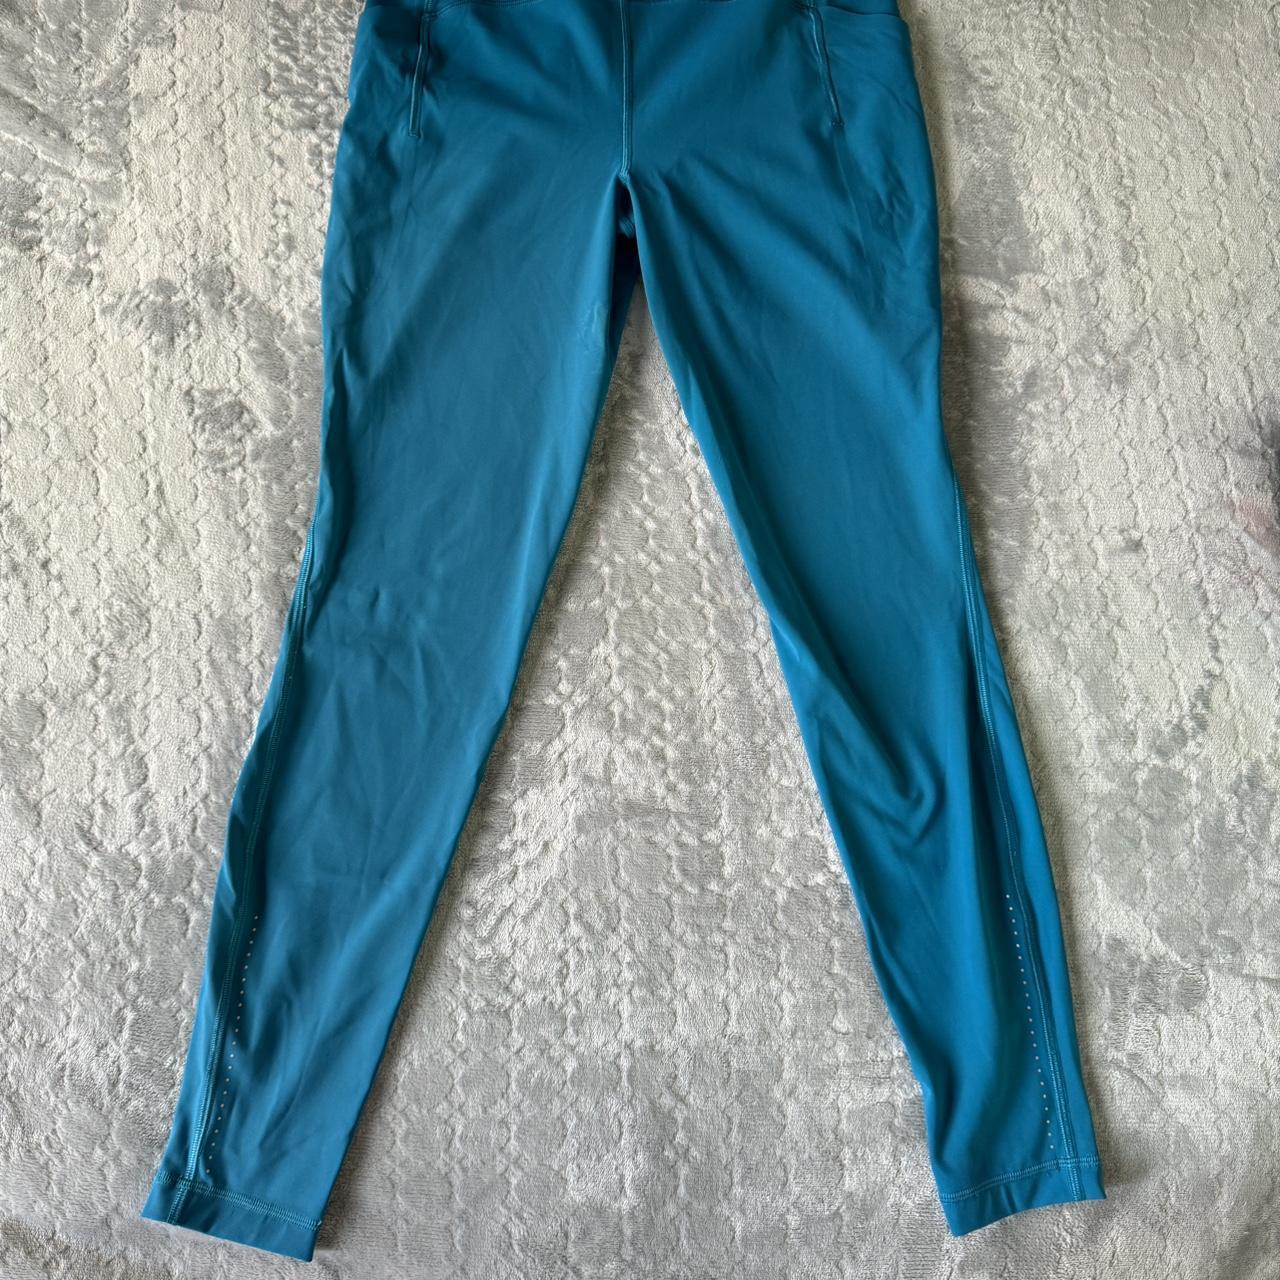 Lululemon Fast and Free High-Rise Tight 25 Leopard - Depop